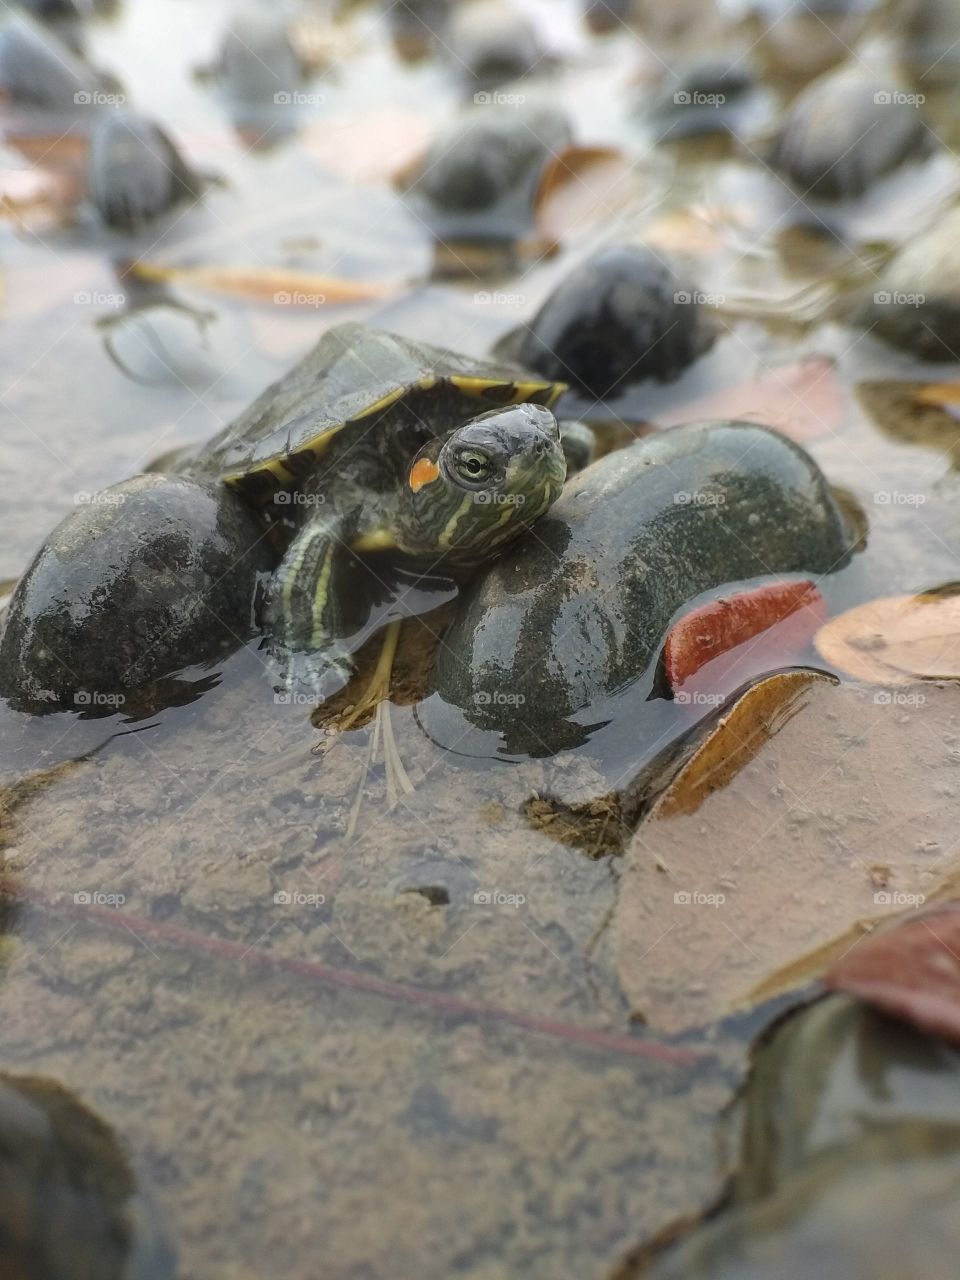 Res Turtle in the river